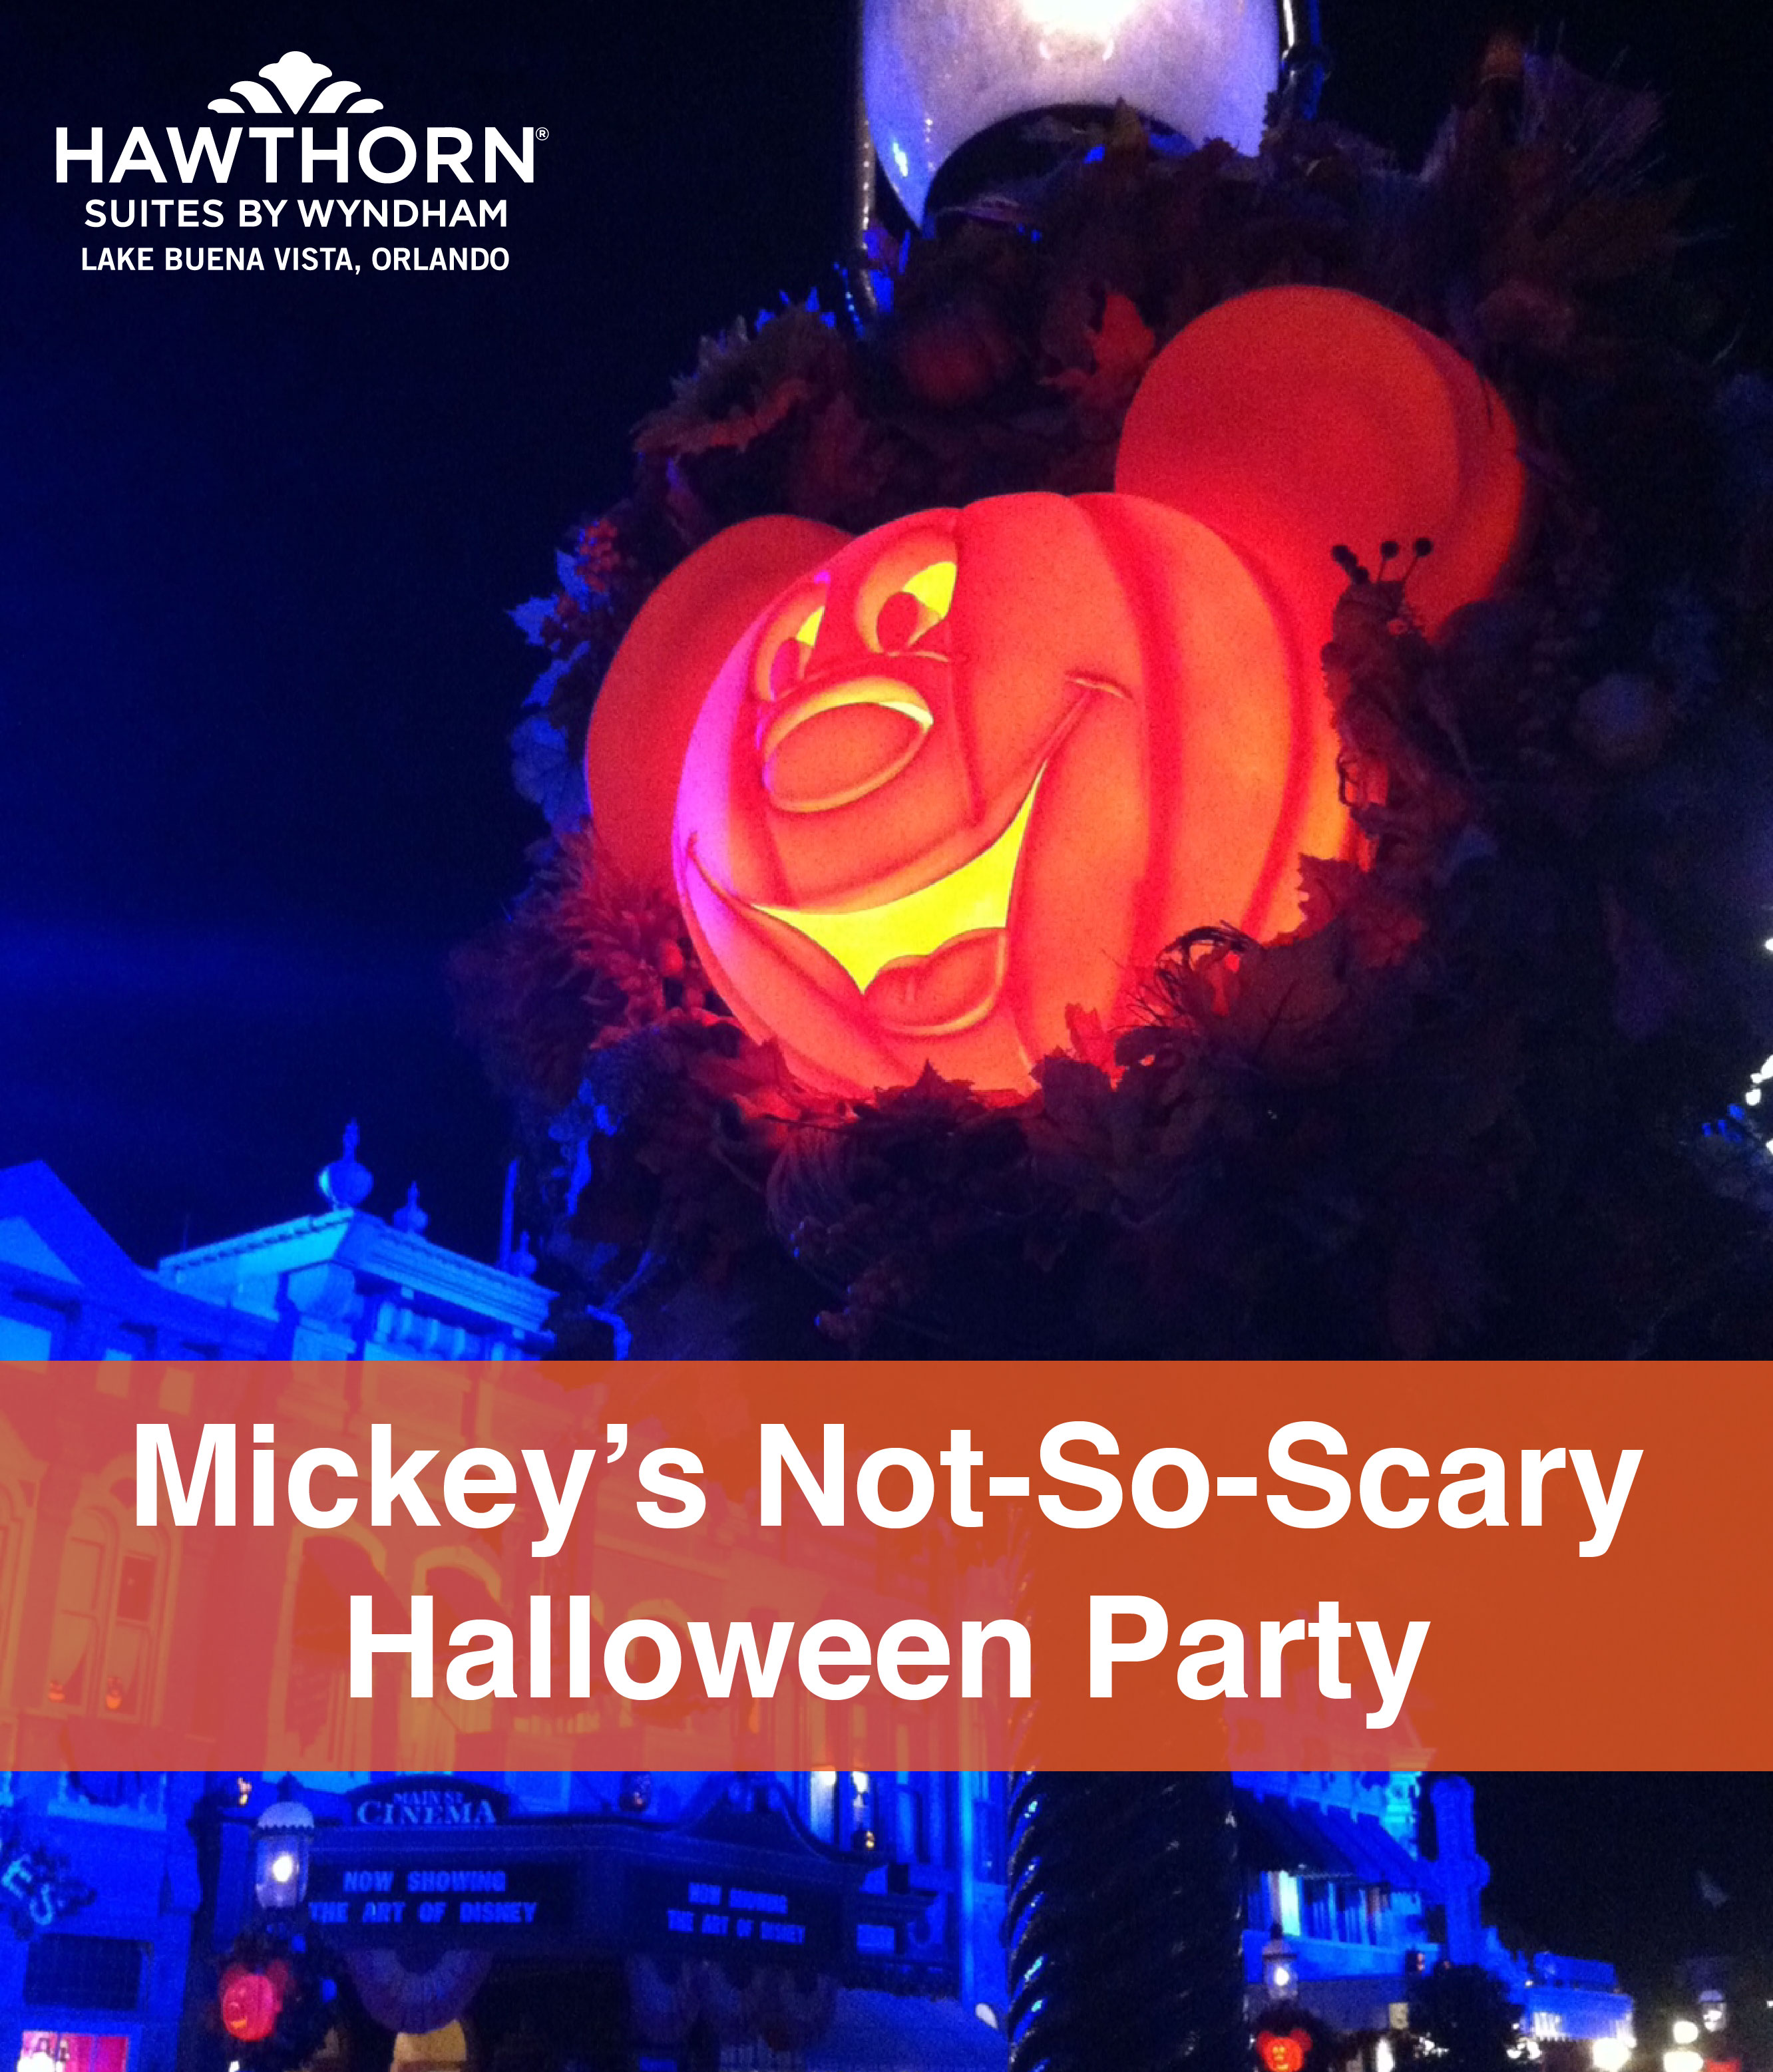 Mickey’s Not-So-Scary Halloween Party - Hawthorn Suites By Wyndham Lake Buena Vista, Orlando